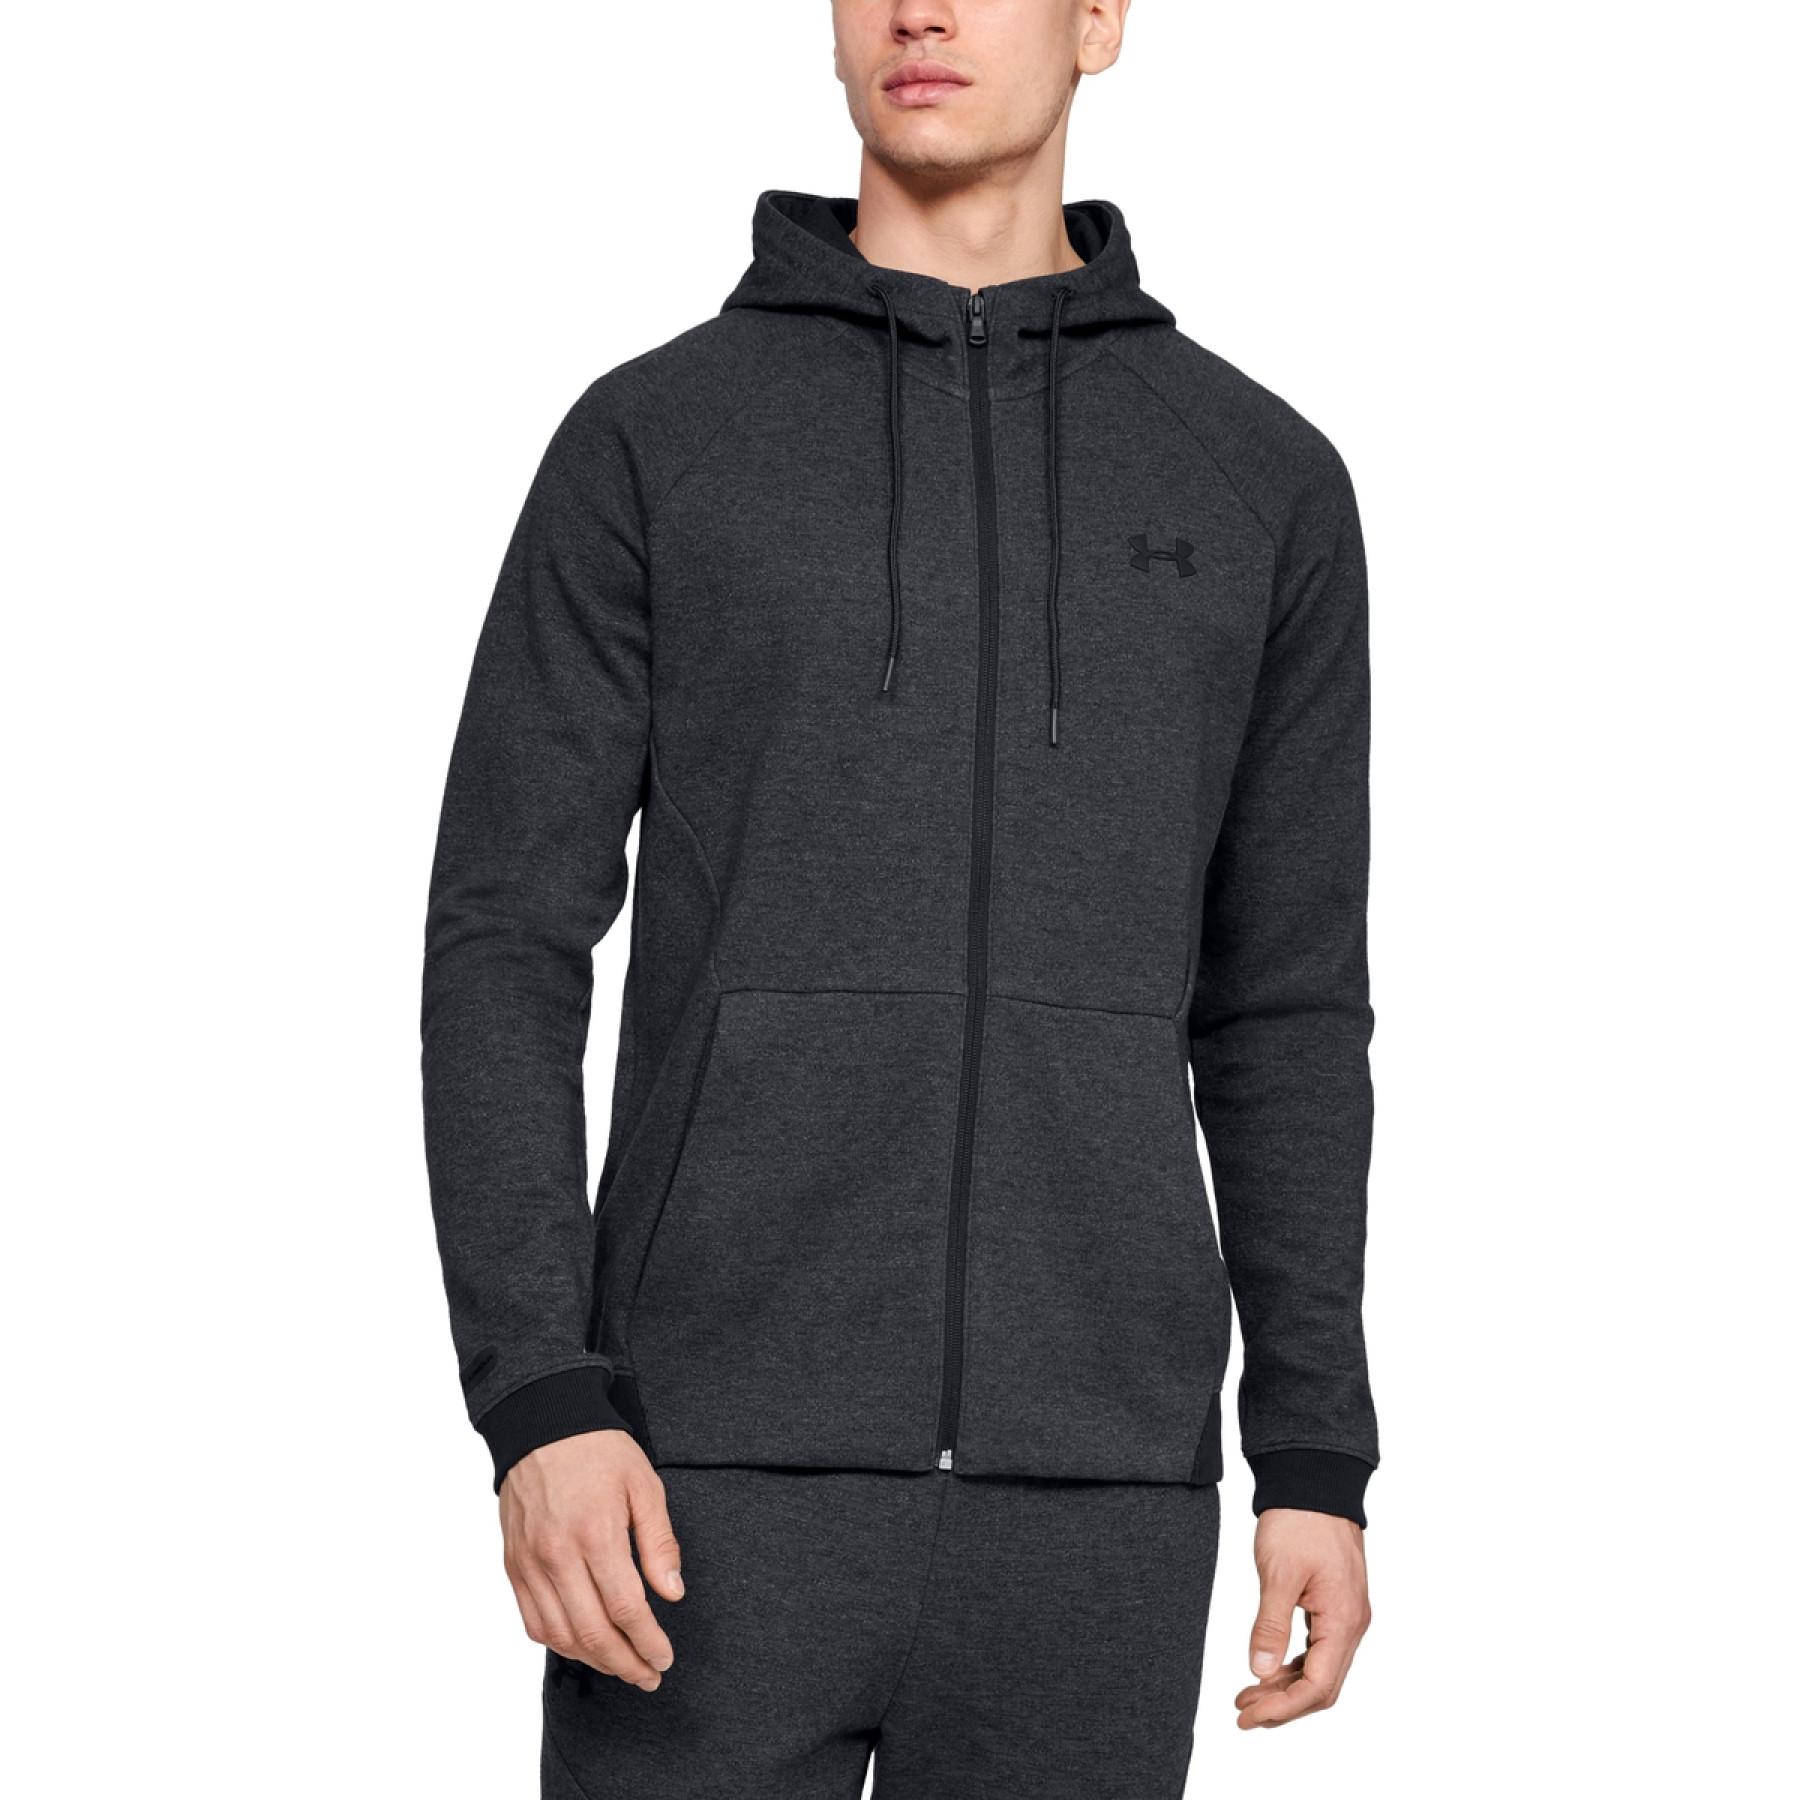 Jacka Under Armour Unstoppable 2X Full Zip